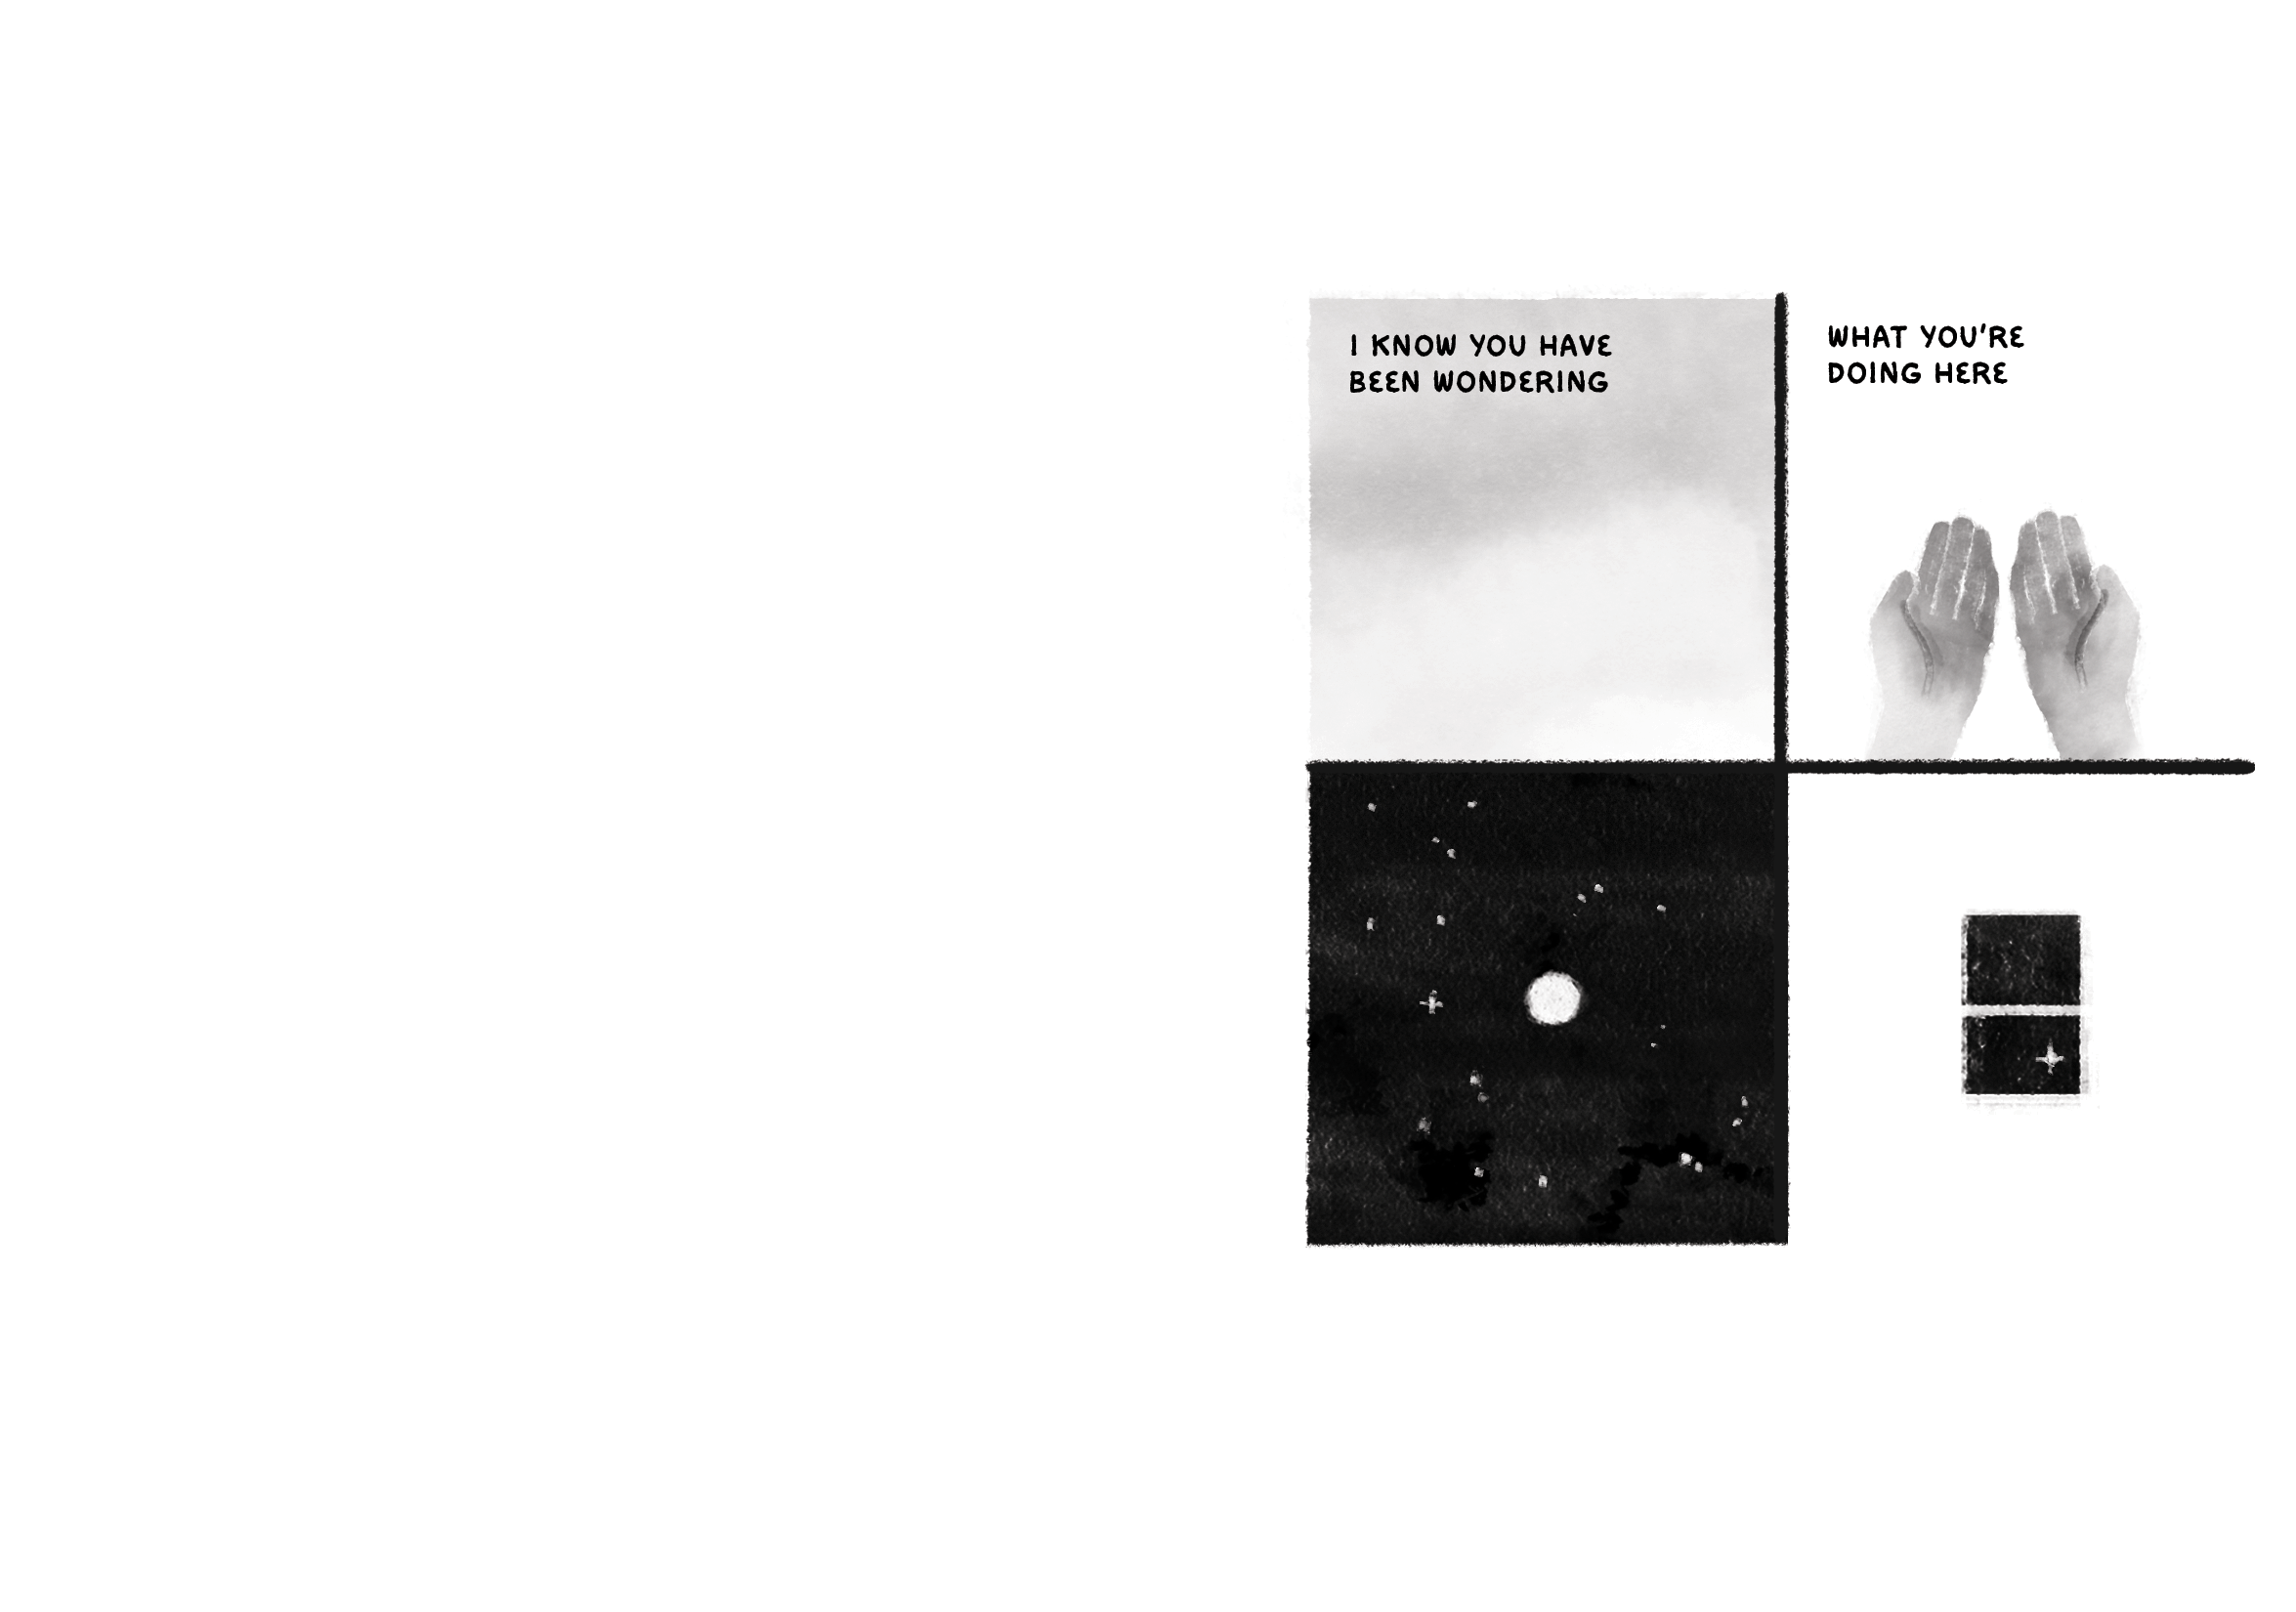 Four-panel comic. Text: I know you have been wondering what you’re doing here. Images: a hazy sky, hands held open, a moon in a starry sky, a window seen from inside with a single star.